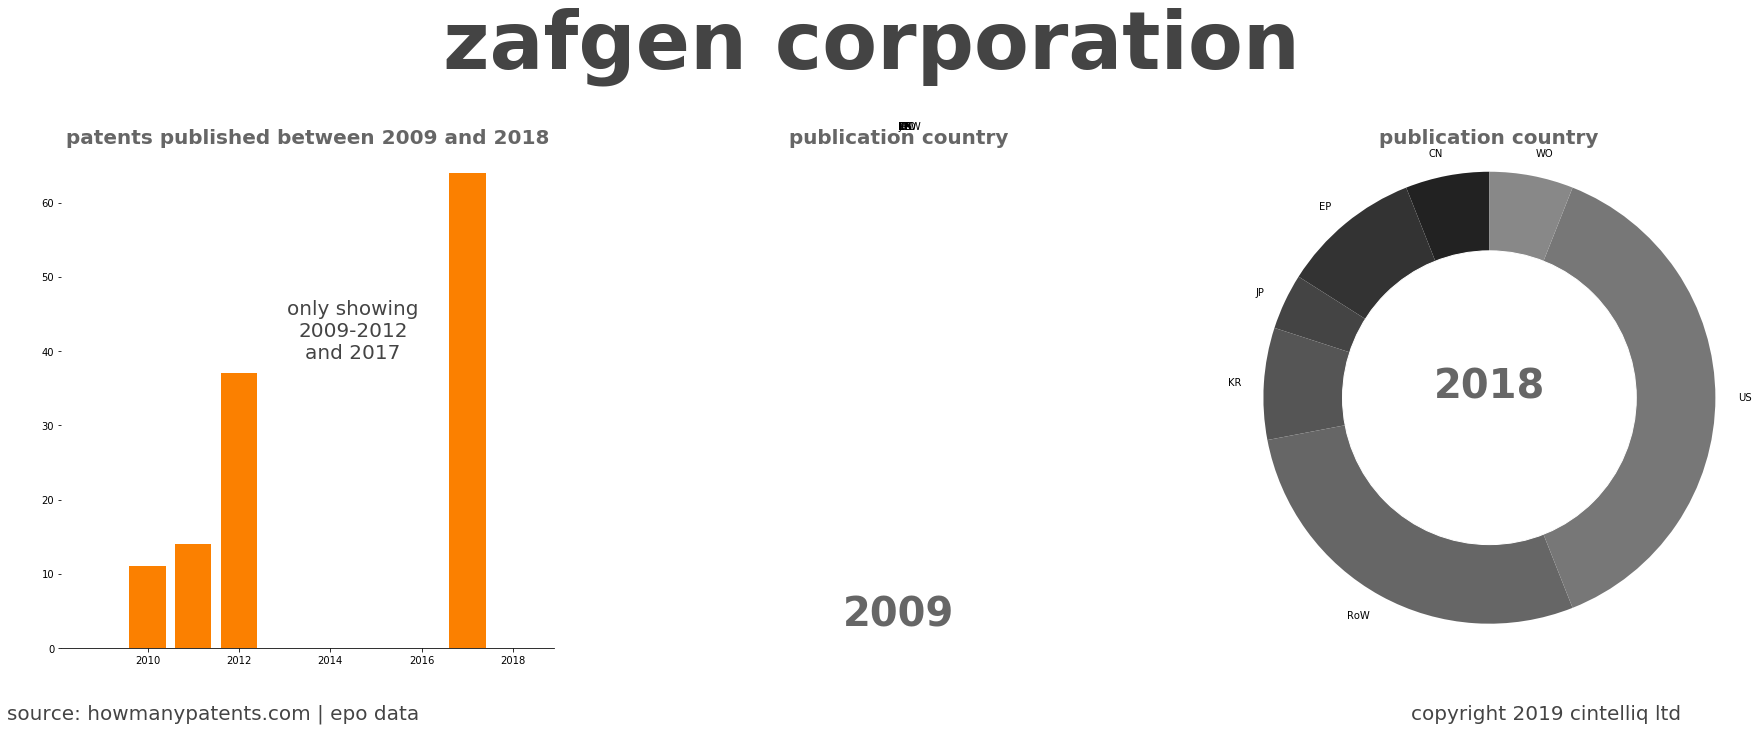 summary of patents for Zafgen Corporation